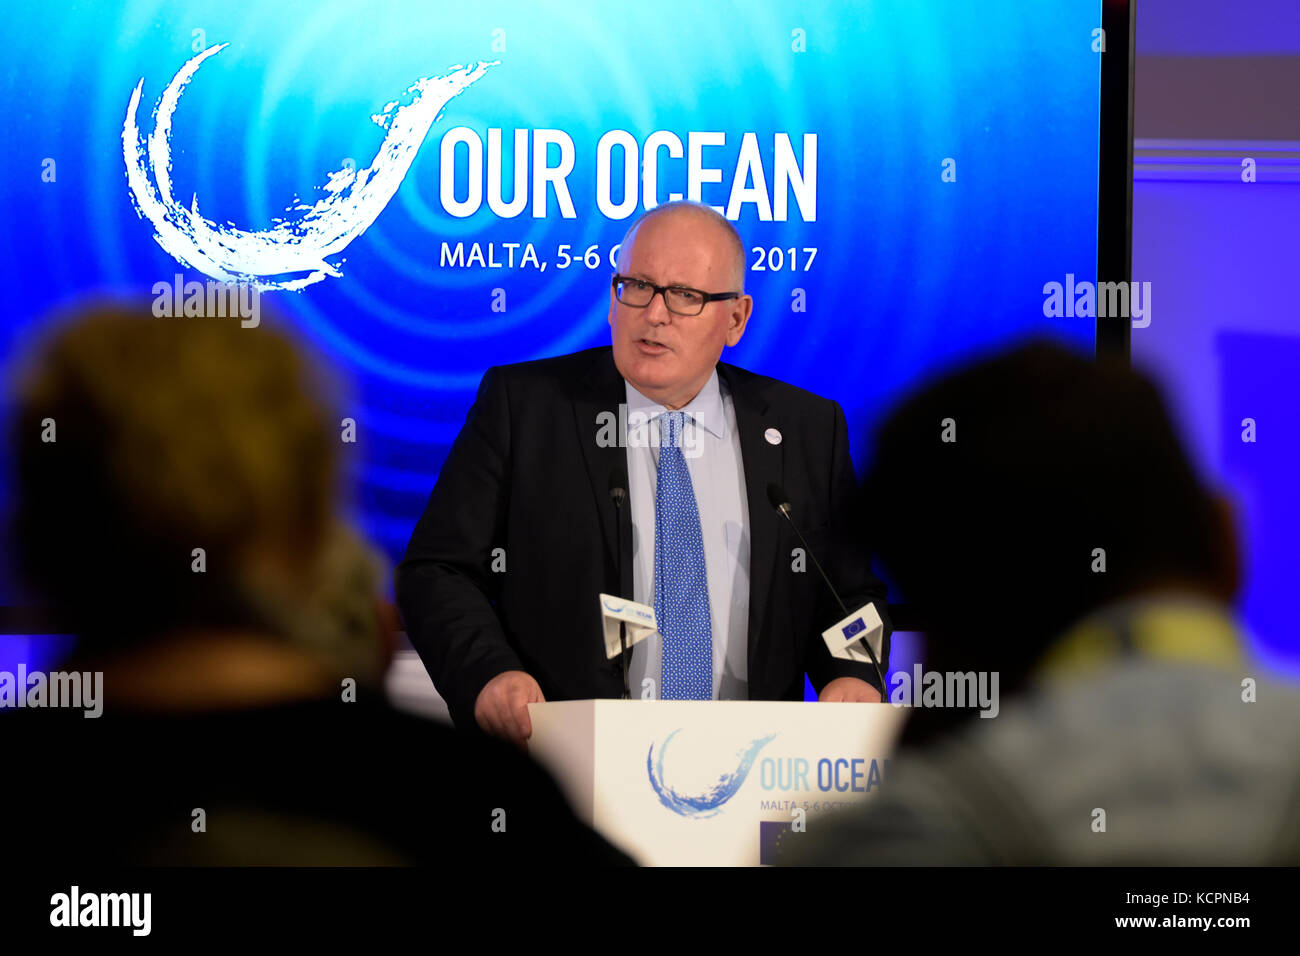 St. Julian's, Malta. 6th Oct, 2017. Frans Timmermans, First Vice-President of the European Commission, addresses a joint press of Our Ocean Conference 2017 in St. Julian's, Malta, on Oct. 6, 2017. More than 6 billion euros (7.01 billion U.S. dollars) was dedicated by public and private sectors from 112 countries to improve management of oceans at the Our Ocean conference 2017 being held on Friday in Malta. Credit: Mark Zammit Cordina/Xinhua/Alamy Live News Stock Photo